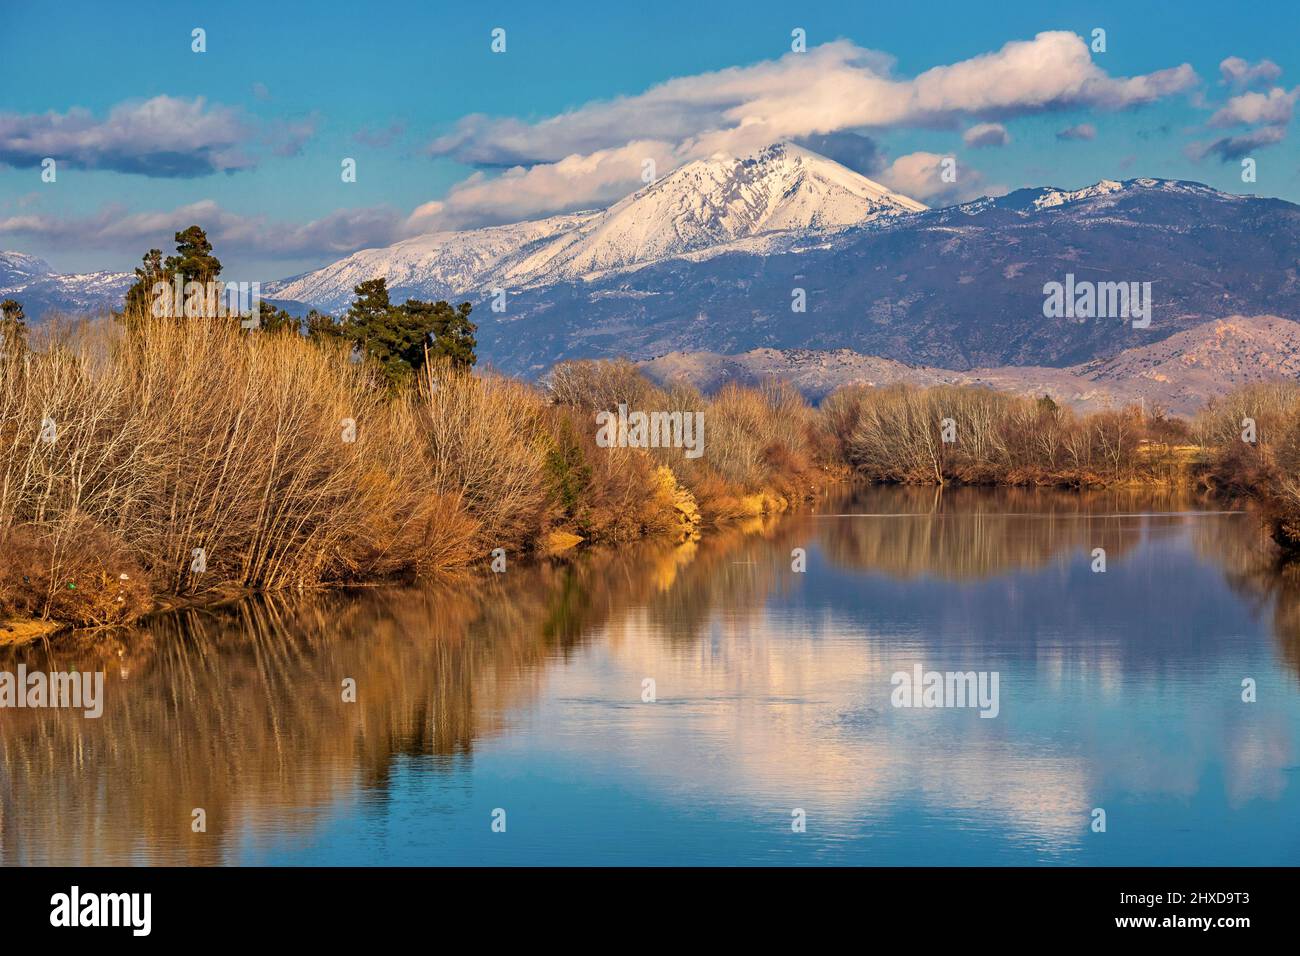 Kissavos (also known as 'Ossa') mountain, reflected on the surface of Pineios river, just outside Larissa city, Thessaly, Greece. Stock Photo